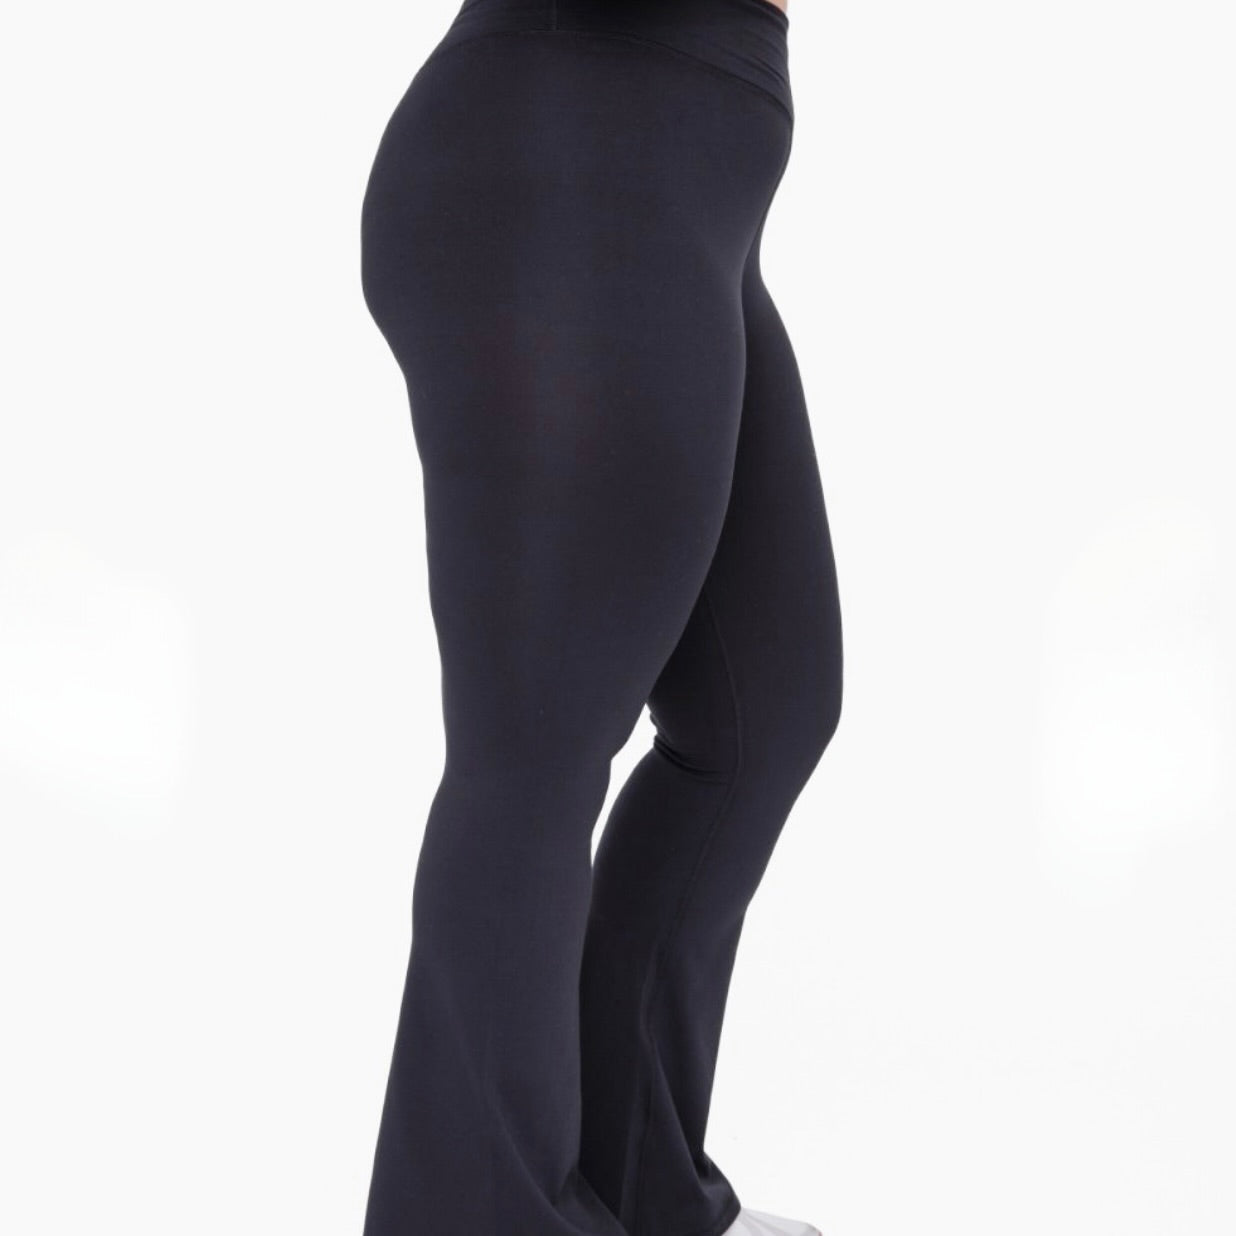 the BEST black flare yoga pants literally ever i wear these every day , flare pants